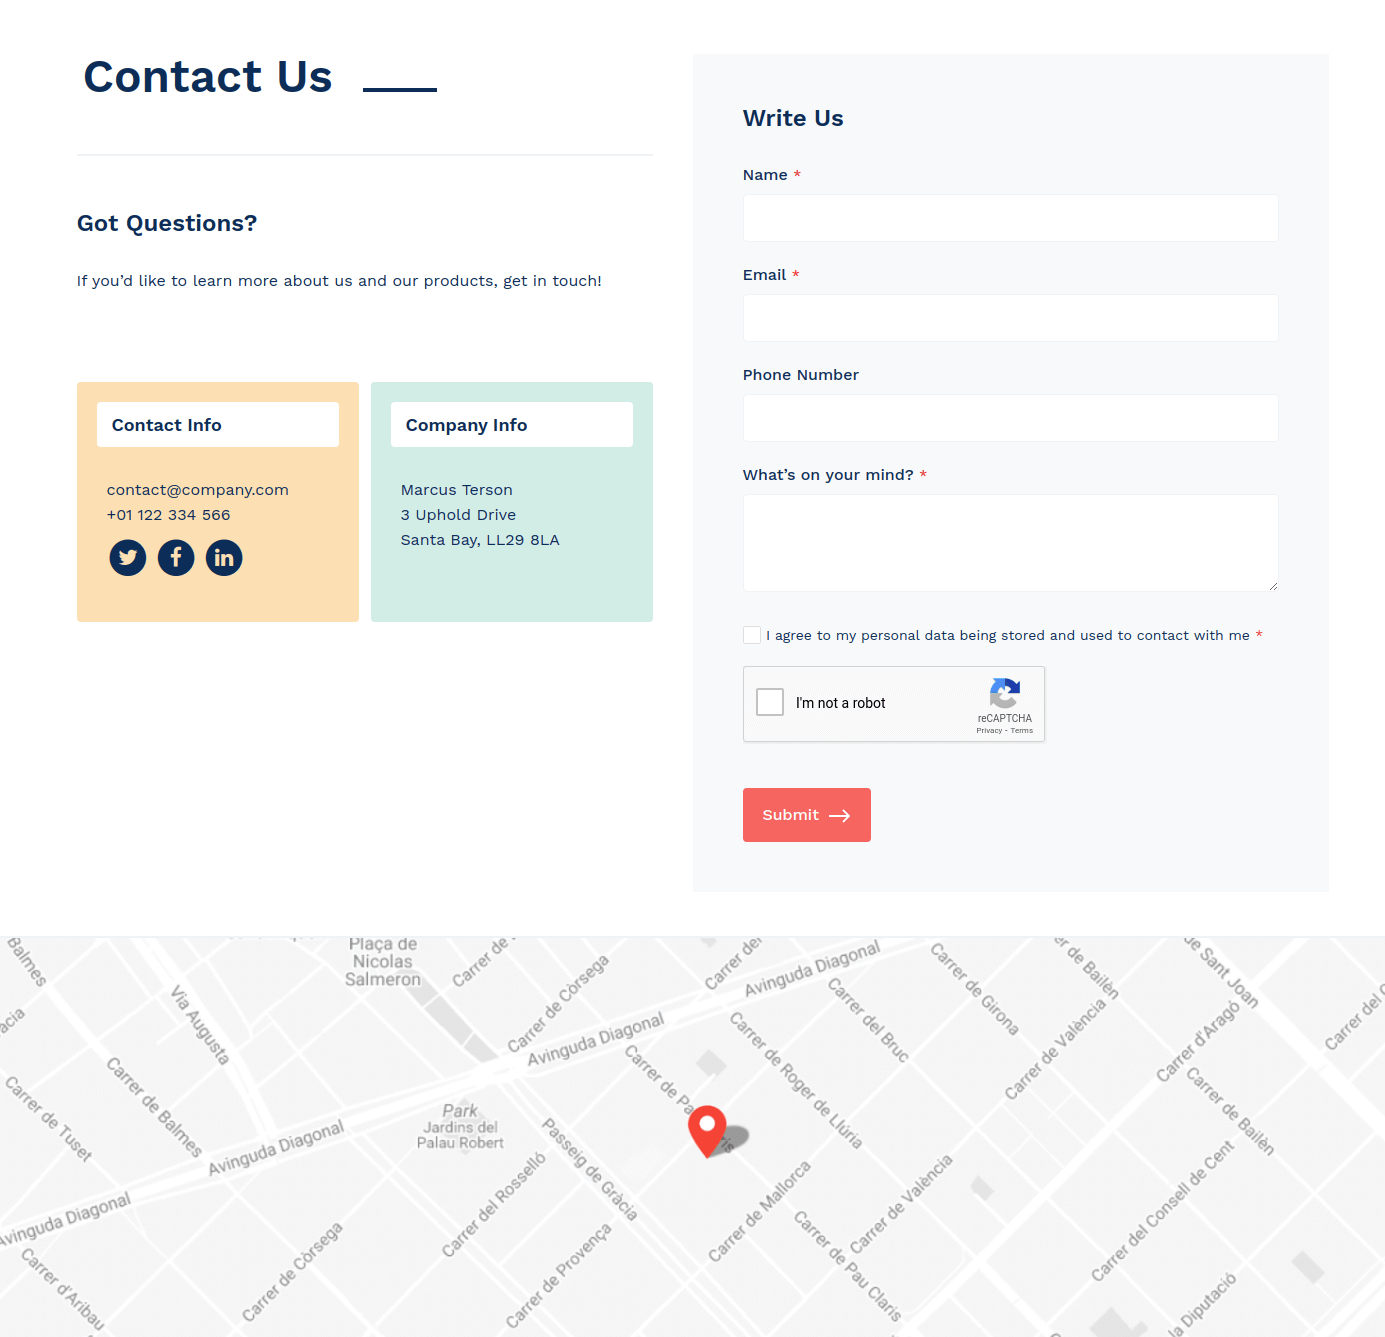 Contacts Page